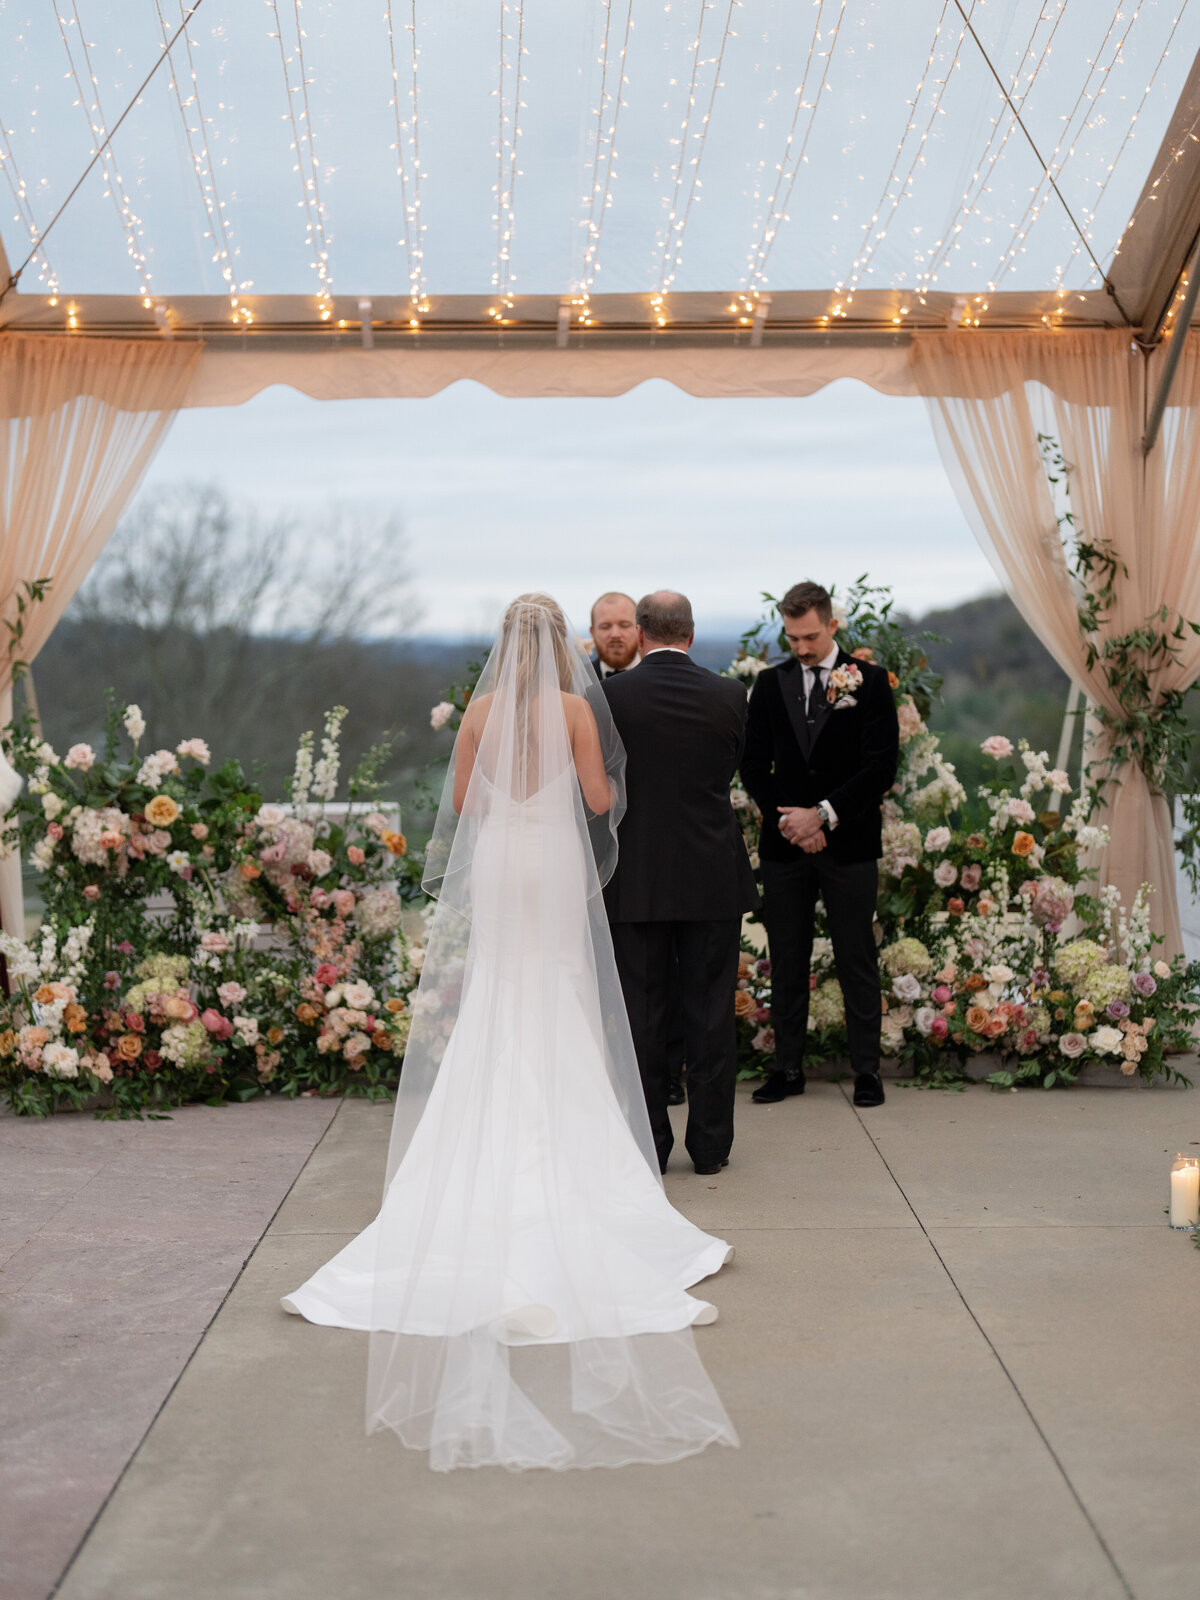 Whitney Bowman Events Knoxville Tennessee Wedding Planner Planning Destination Southern Weddings Florida 30A Alabama Luxury Event Destination Weddings MaggieSpencerWedding_Knoxville_2022_@benfinch_FinchPhoto-268